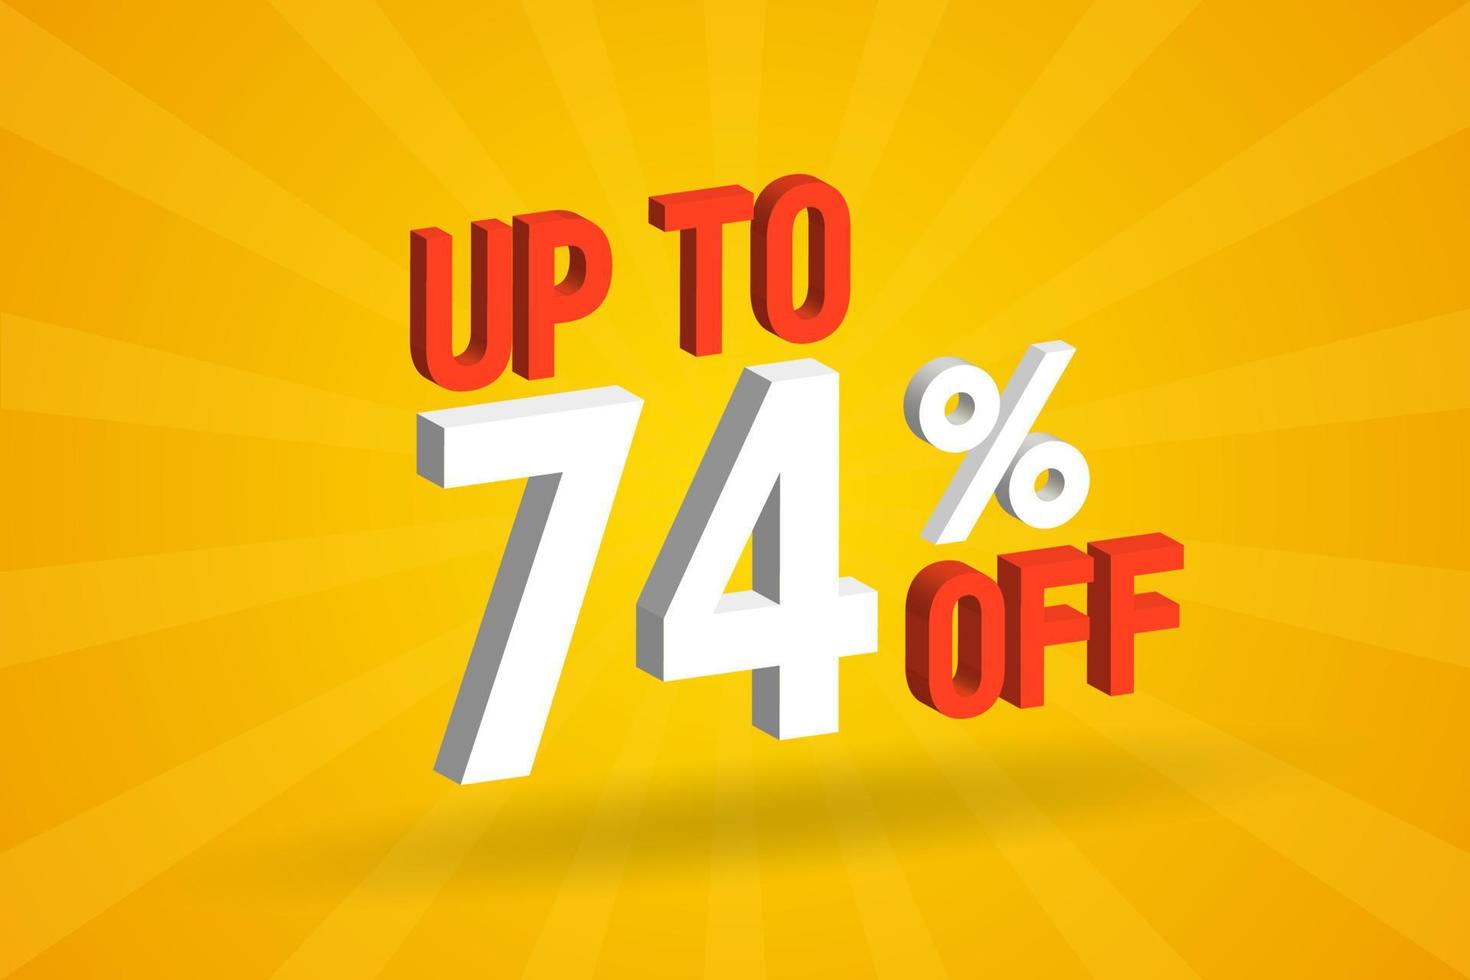 Up To 74 Percent off 3D Special promotional campaign design. Upto 74 of 3D Discount Offer for Sale and marketing. vector